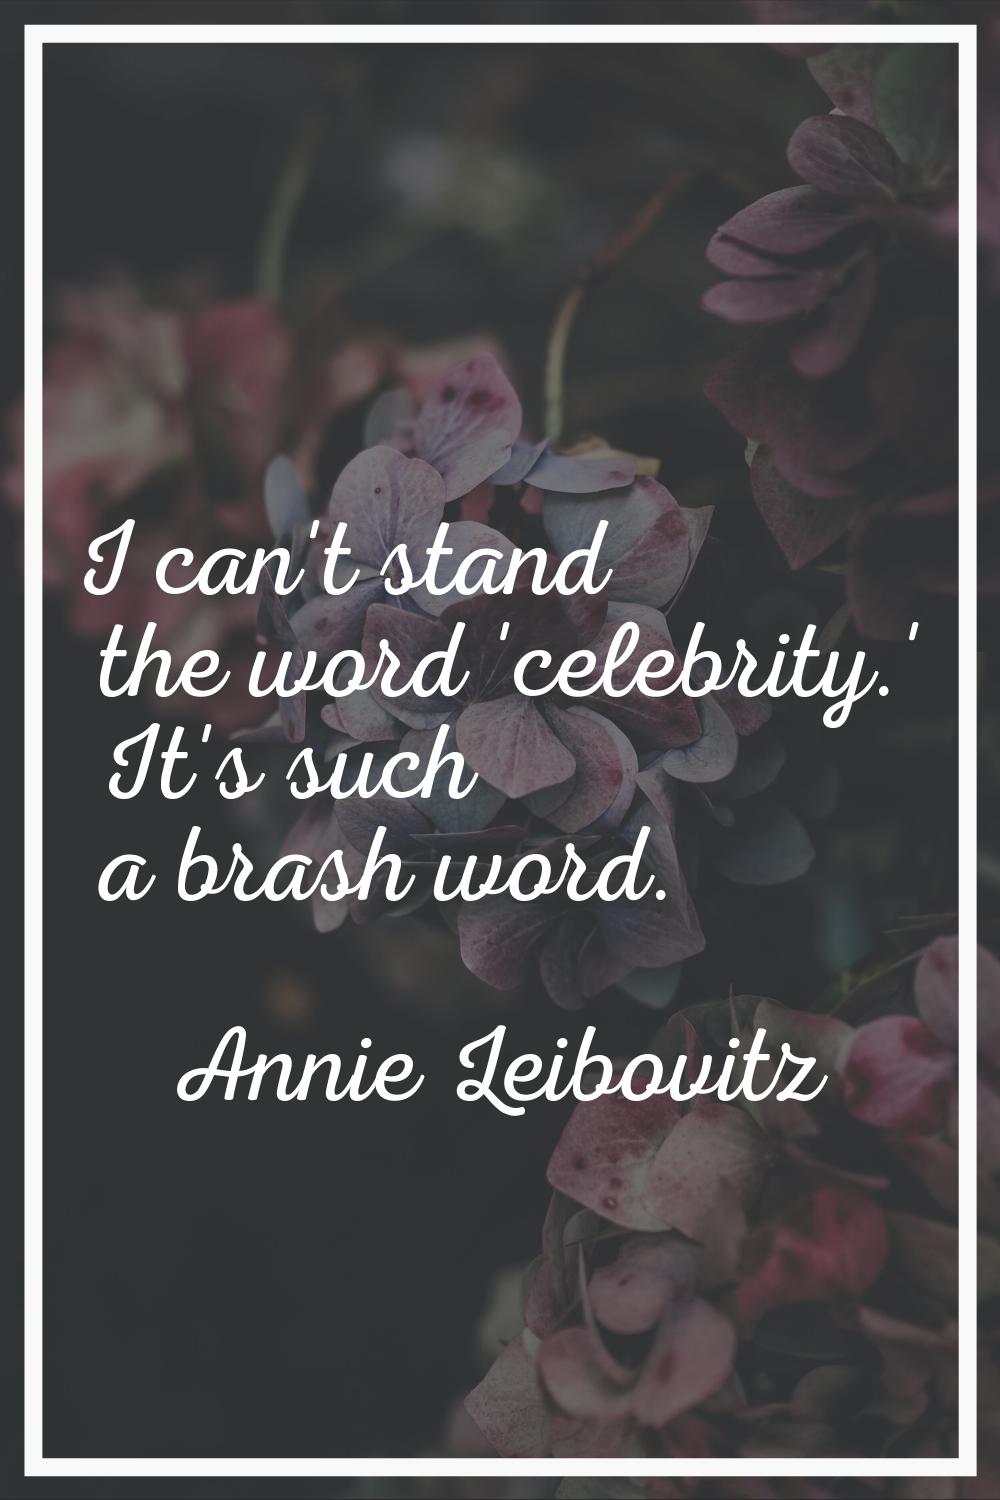 I can't stand the word 'celebrity.' It's such a brash word.